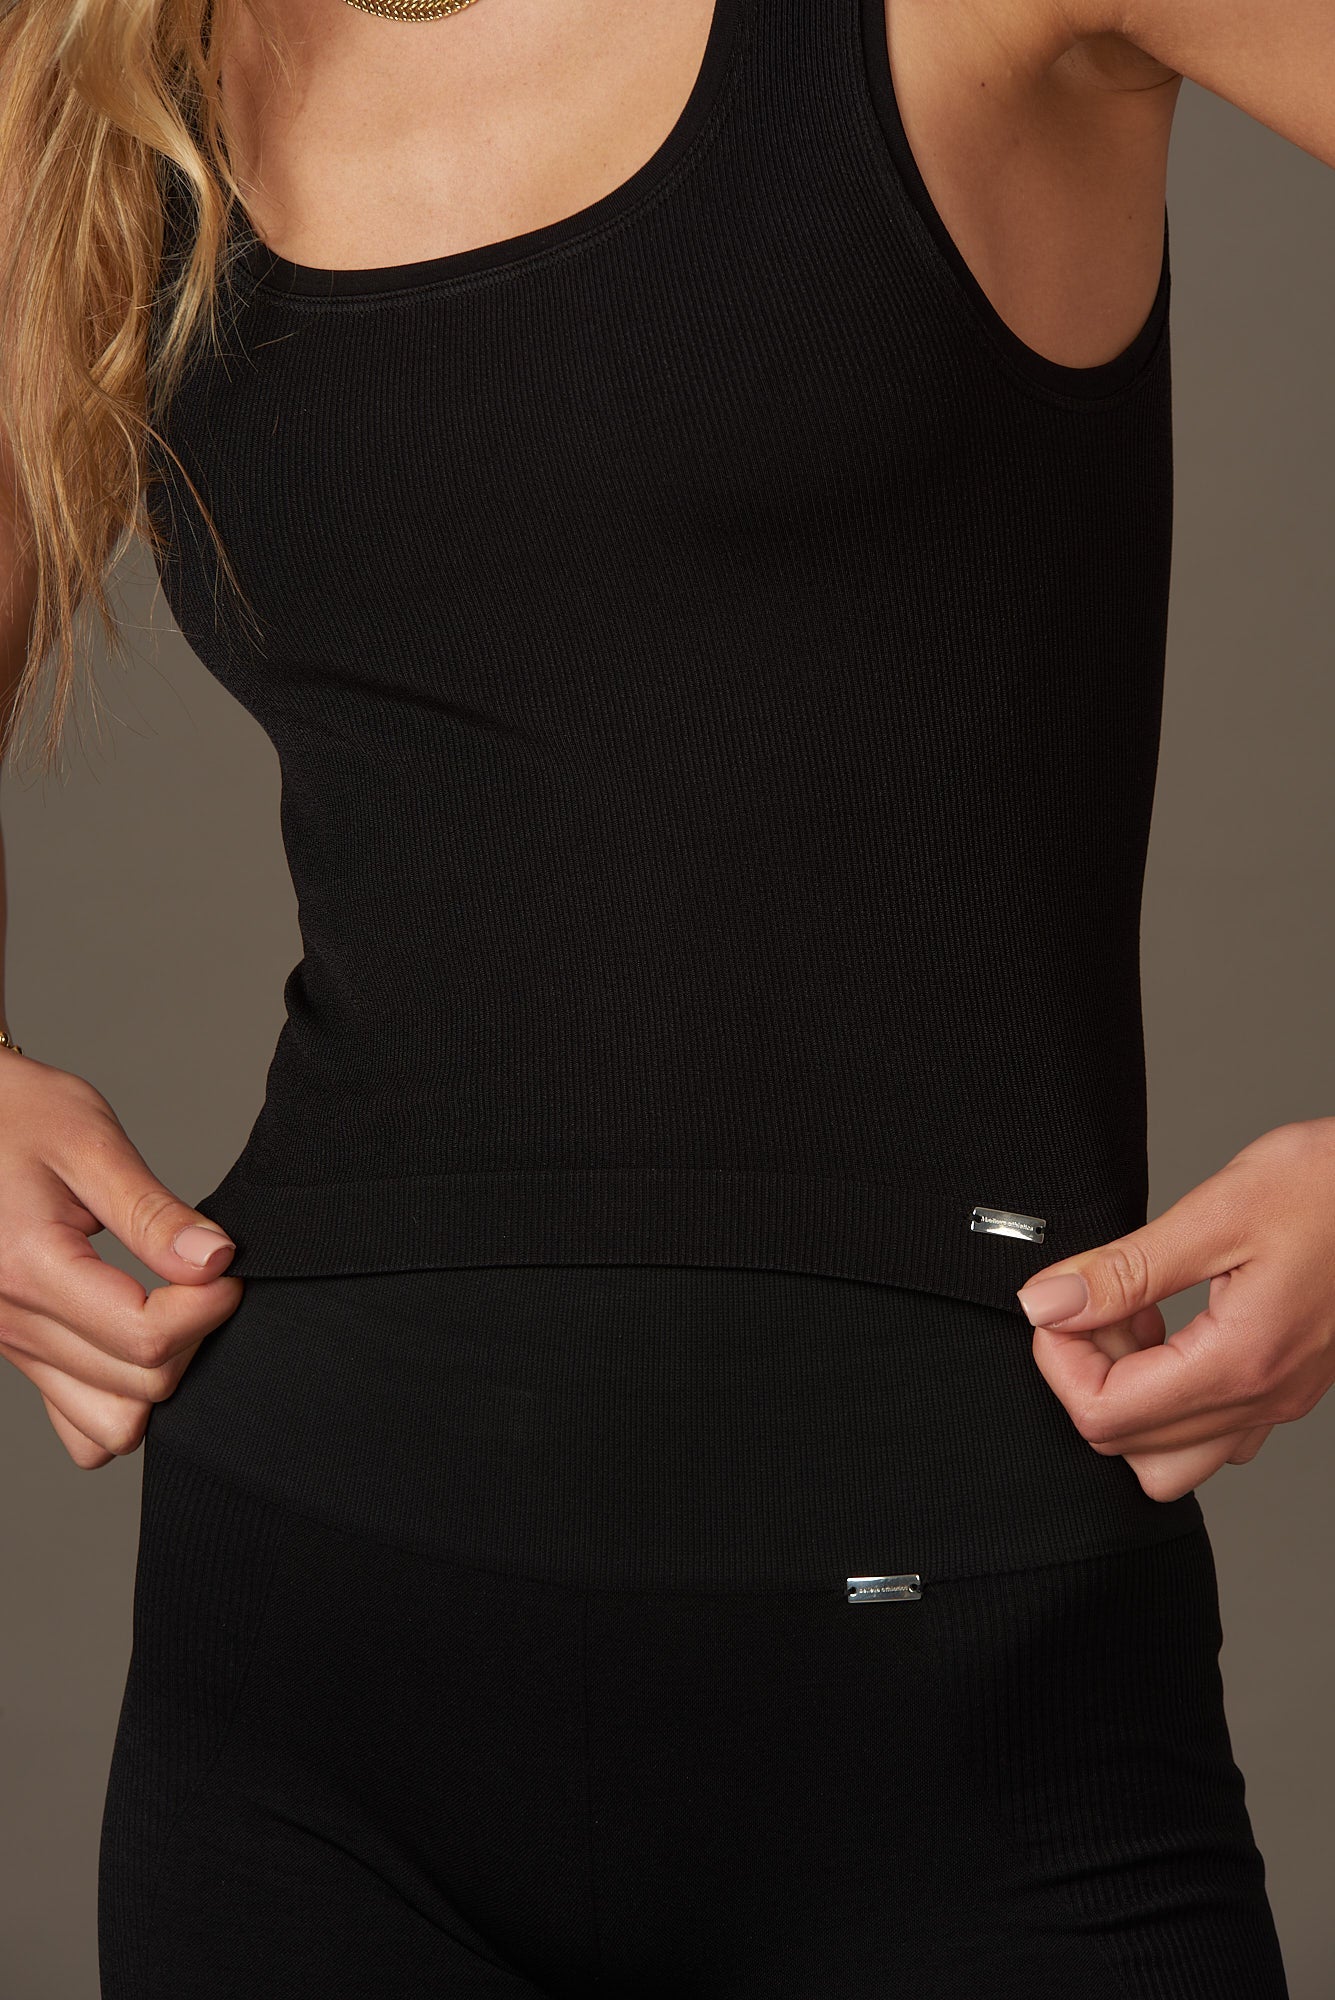 Gleam Top in Black-Tops-Shop Clothing Sustainable Recycled Yoga Leggings Women On-line Barcelona Believe Athletics Sustainable Recycled Yoga Clothes